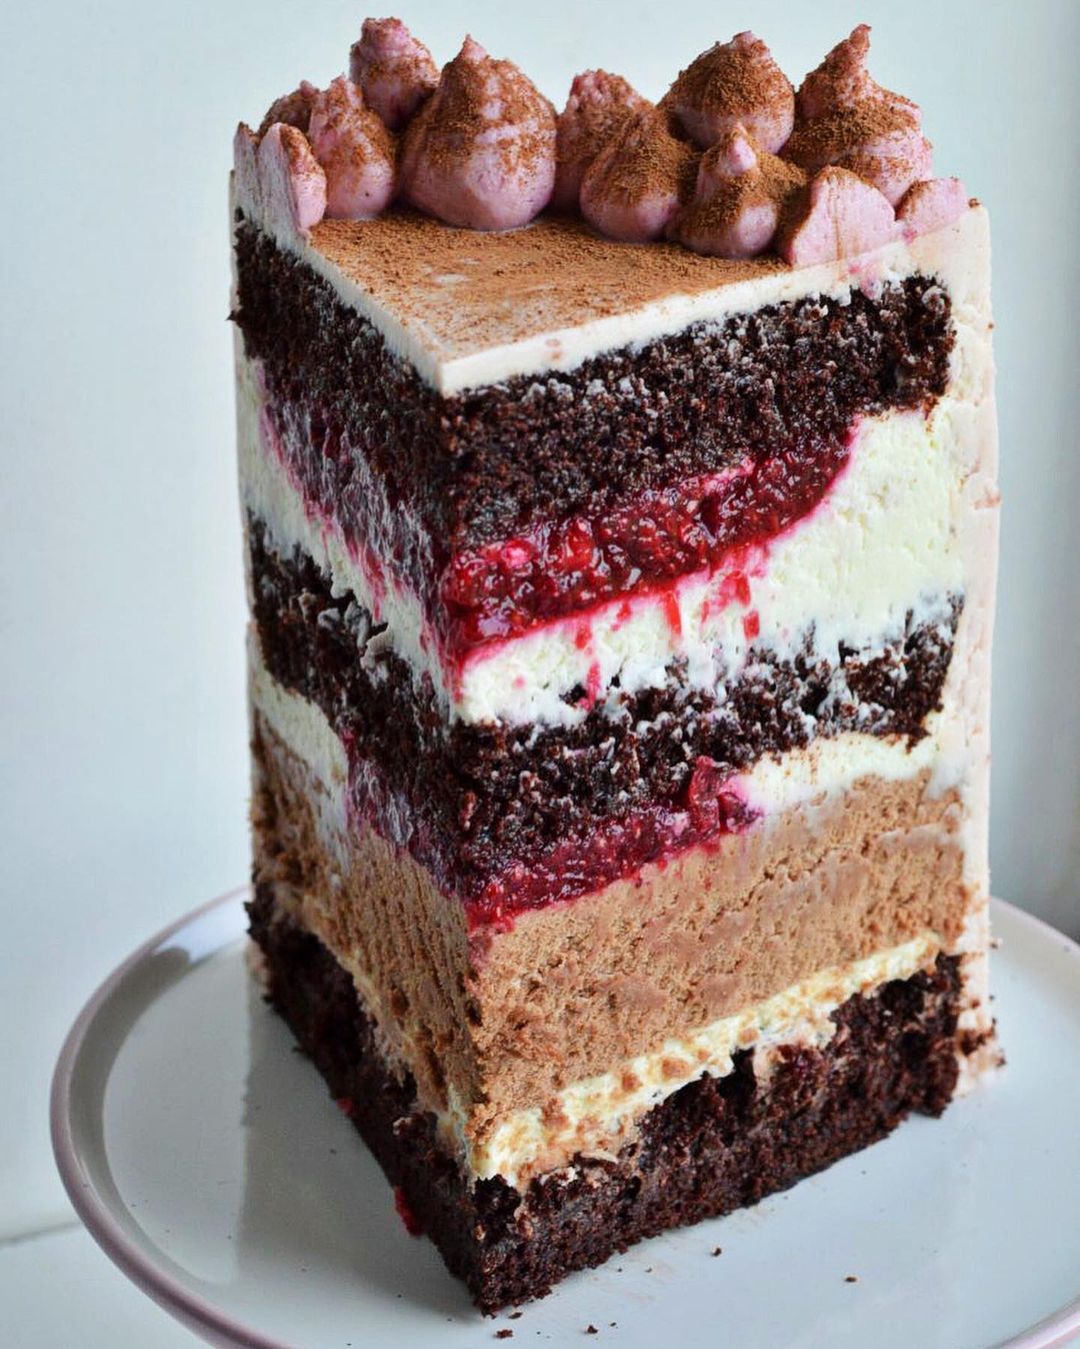 RASPBERRY & LINGONBERRY CAKE WITH CHOCOLATE MOUSSE